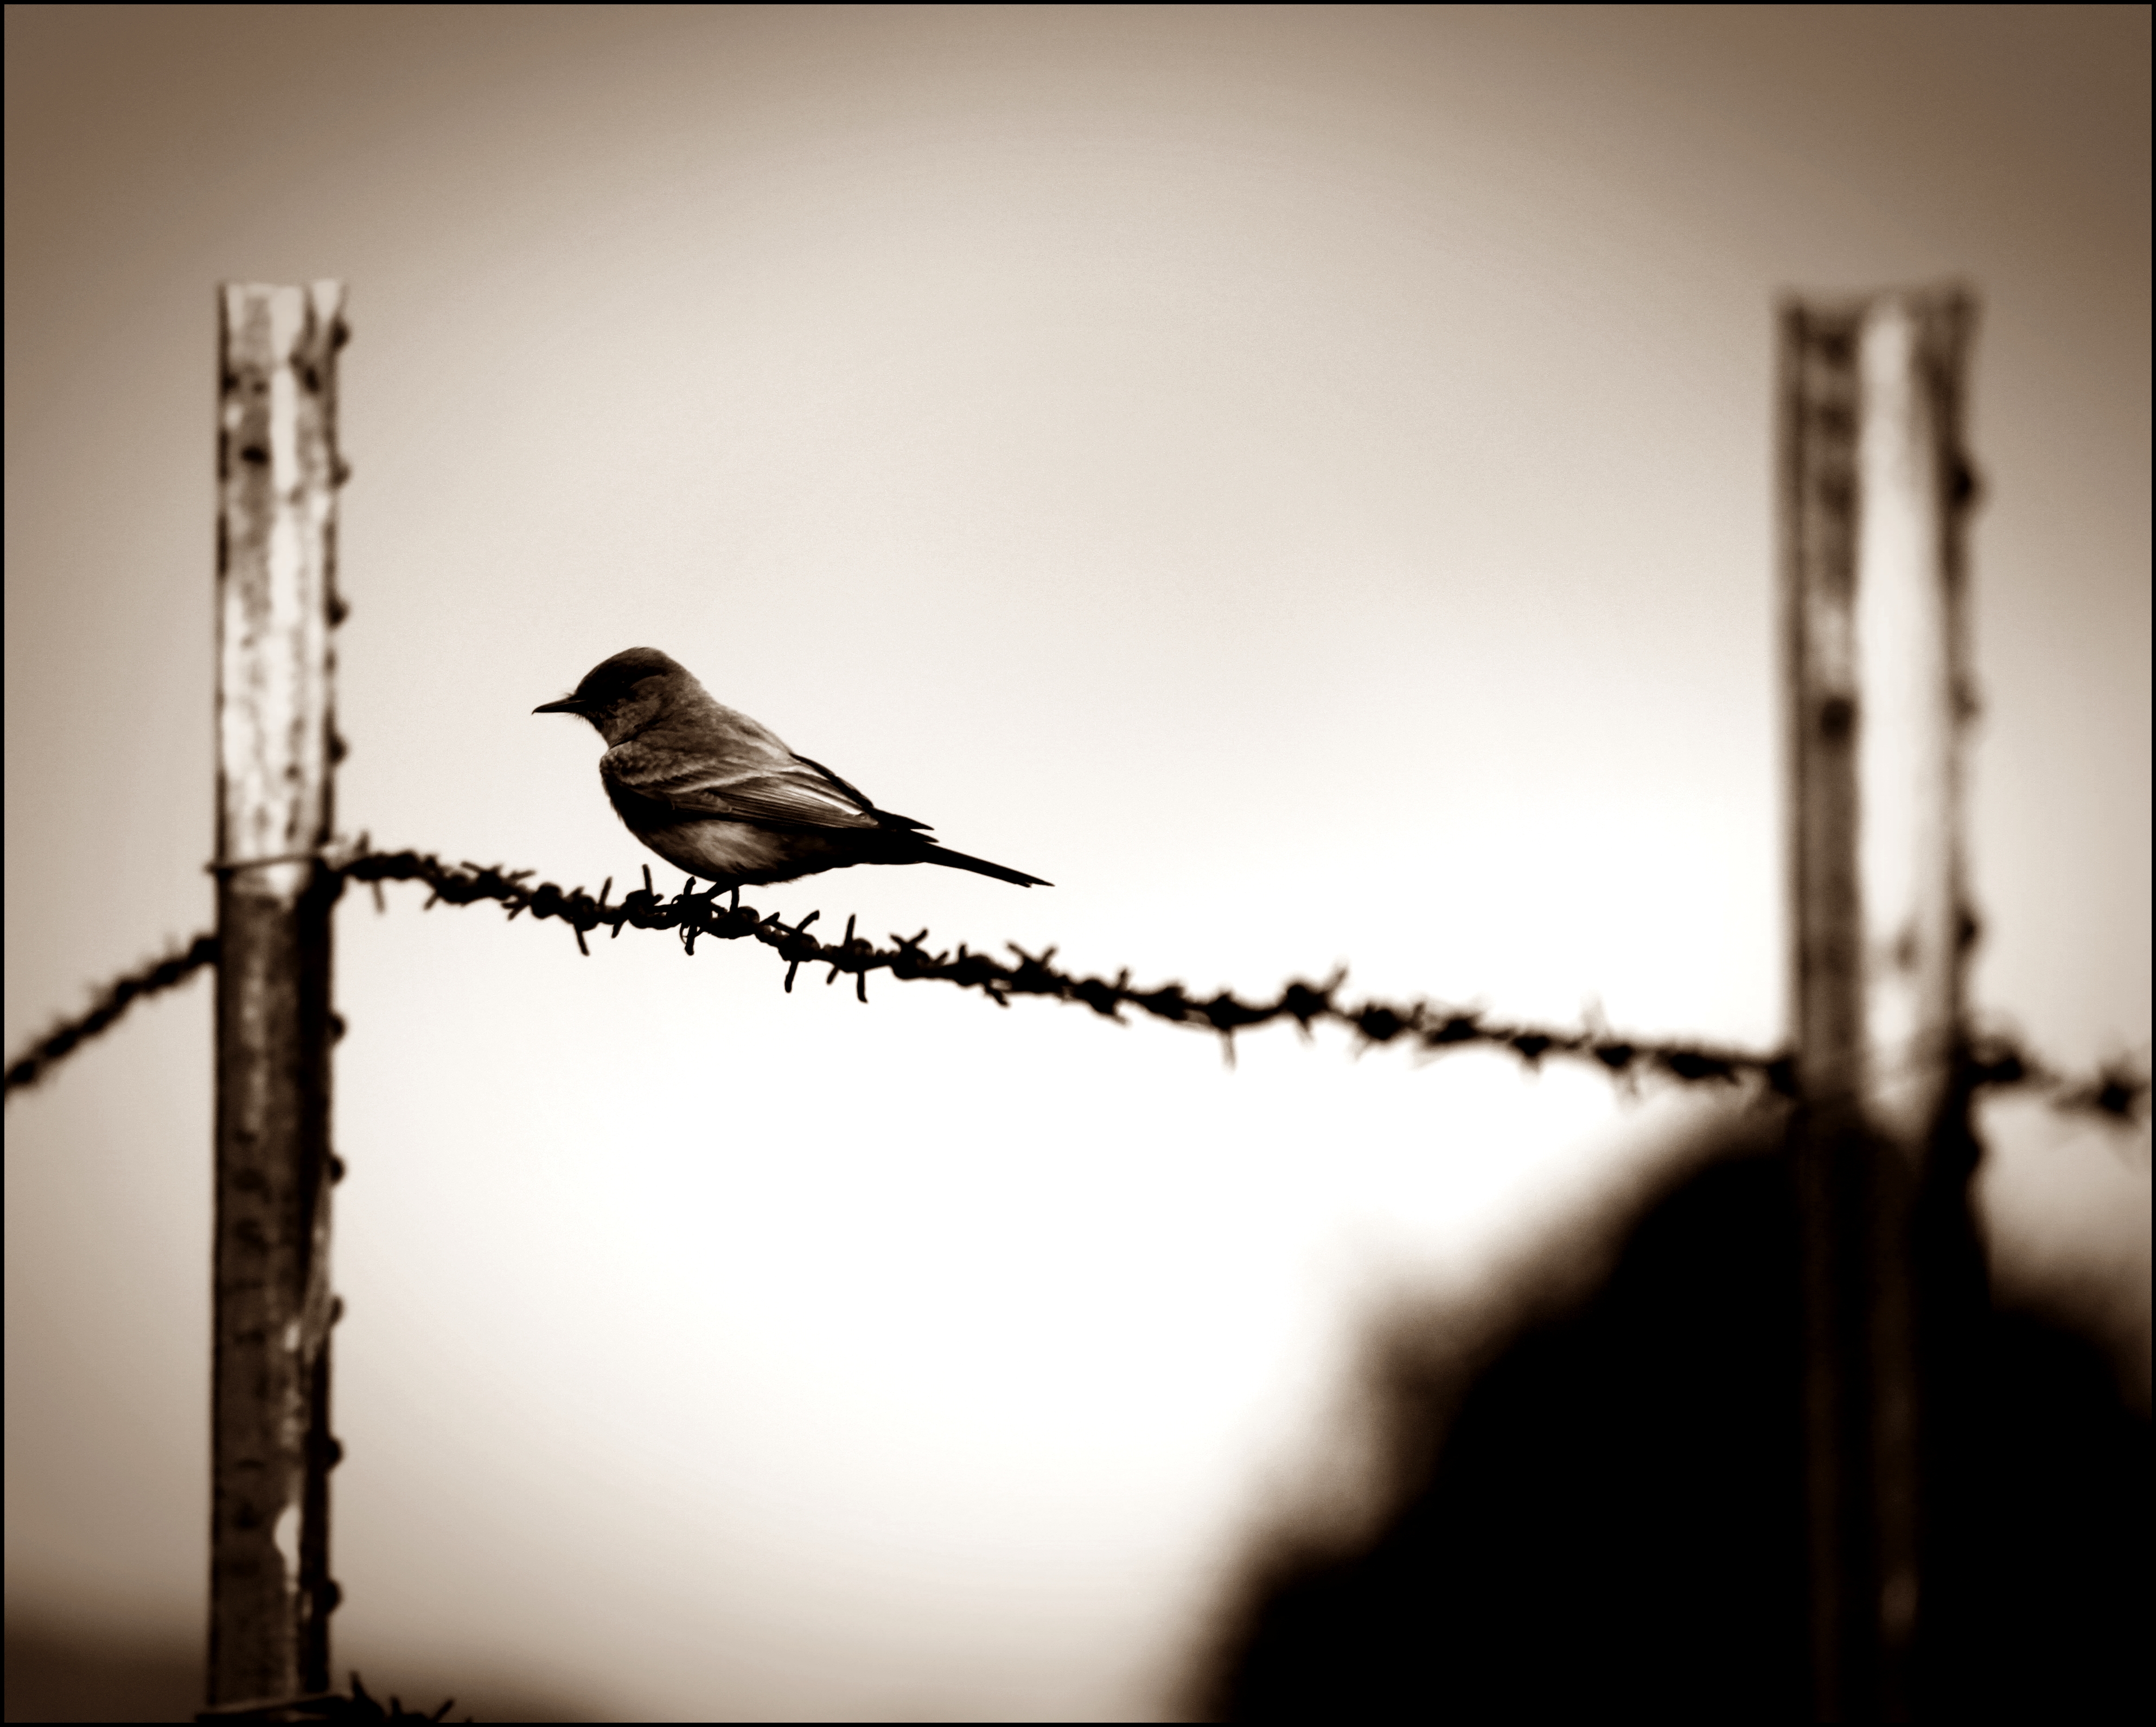 Sepia tone photograph of a lone bird sitting on a power line.